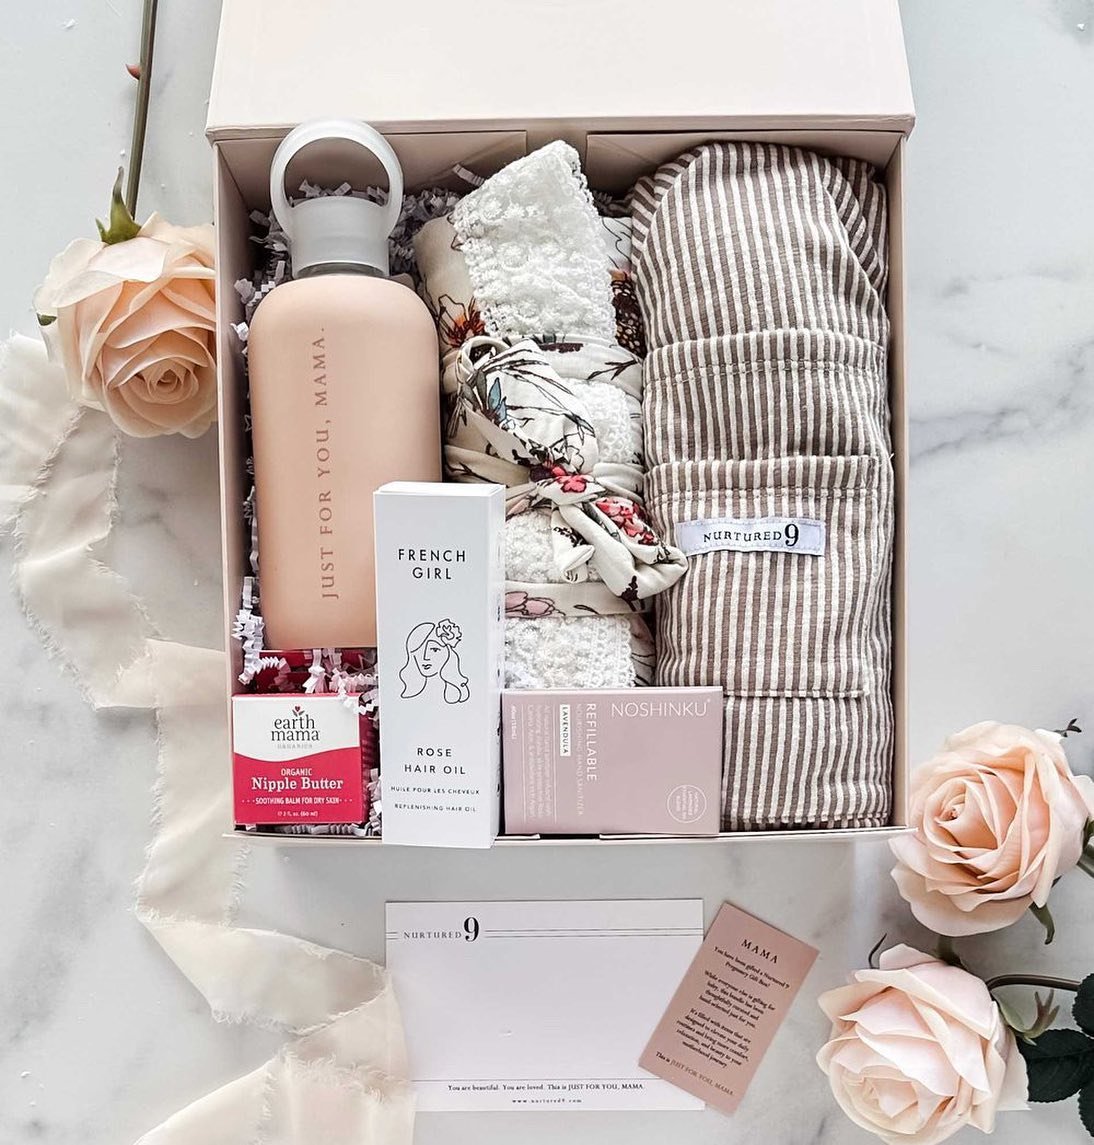 The Replenish and Restore New Mom/Postpartum Gift Box is a care package for moms that has been thoughtfully curated to include an assortment of elevated yet practical items that are perfectly well suited for a new mom during her &ldquo;fourth trimest